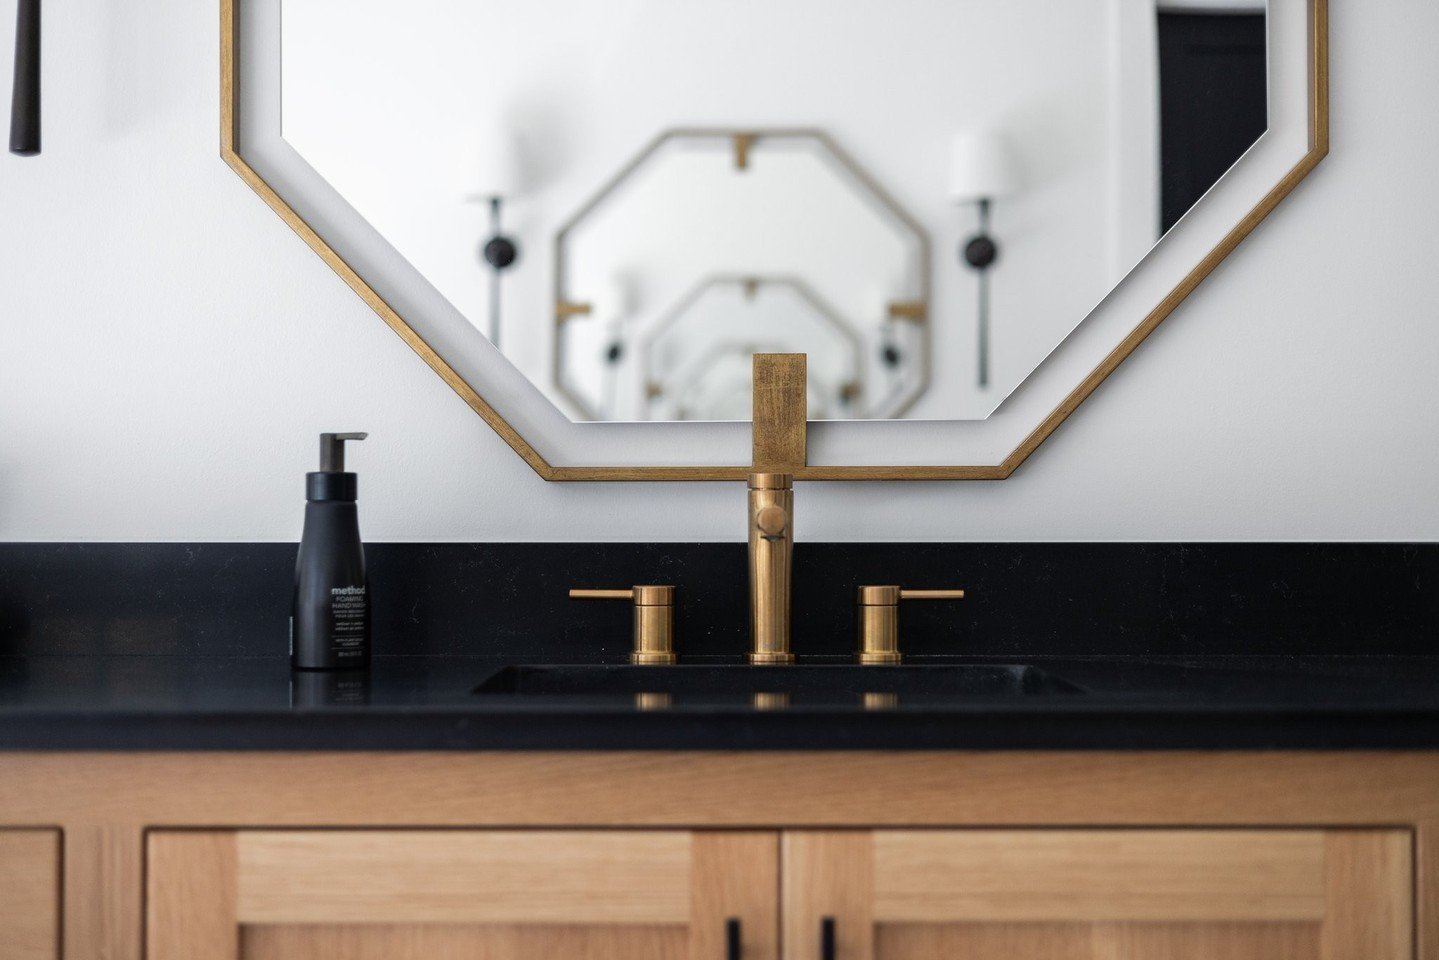 Sleek lines, warm wood, and brass details that shine. ✨ Inspired? Connect with us for your next project! ☎️⁠
⁠
#howingtonconstruction #dreamhome #tennessee #nashville #remodeling #customhomebuilder #homerenovation #homeremodel #customhomes #homebuild